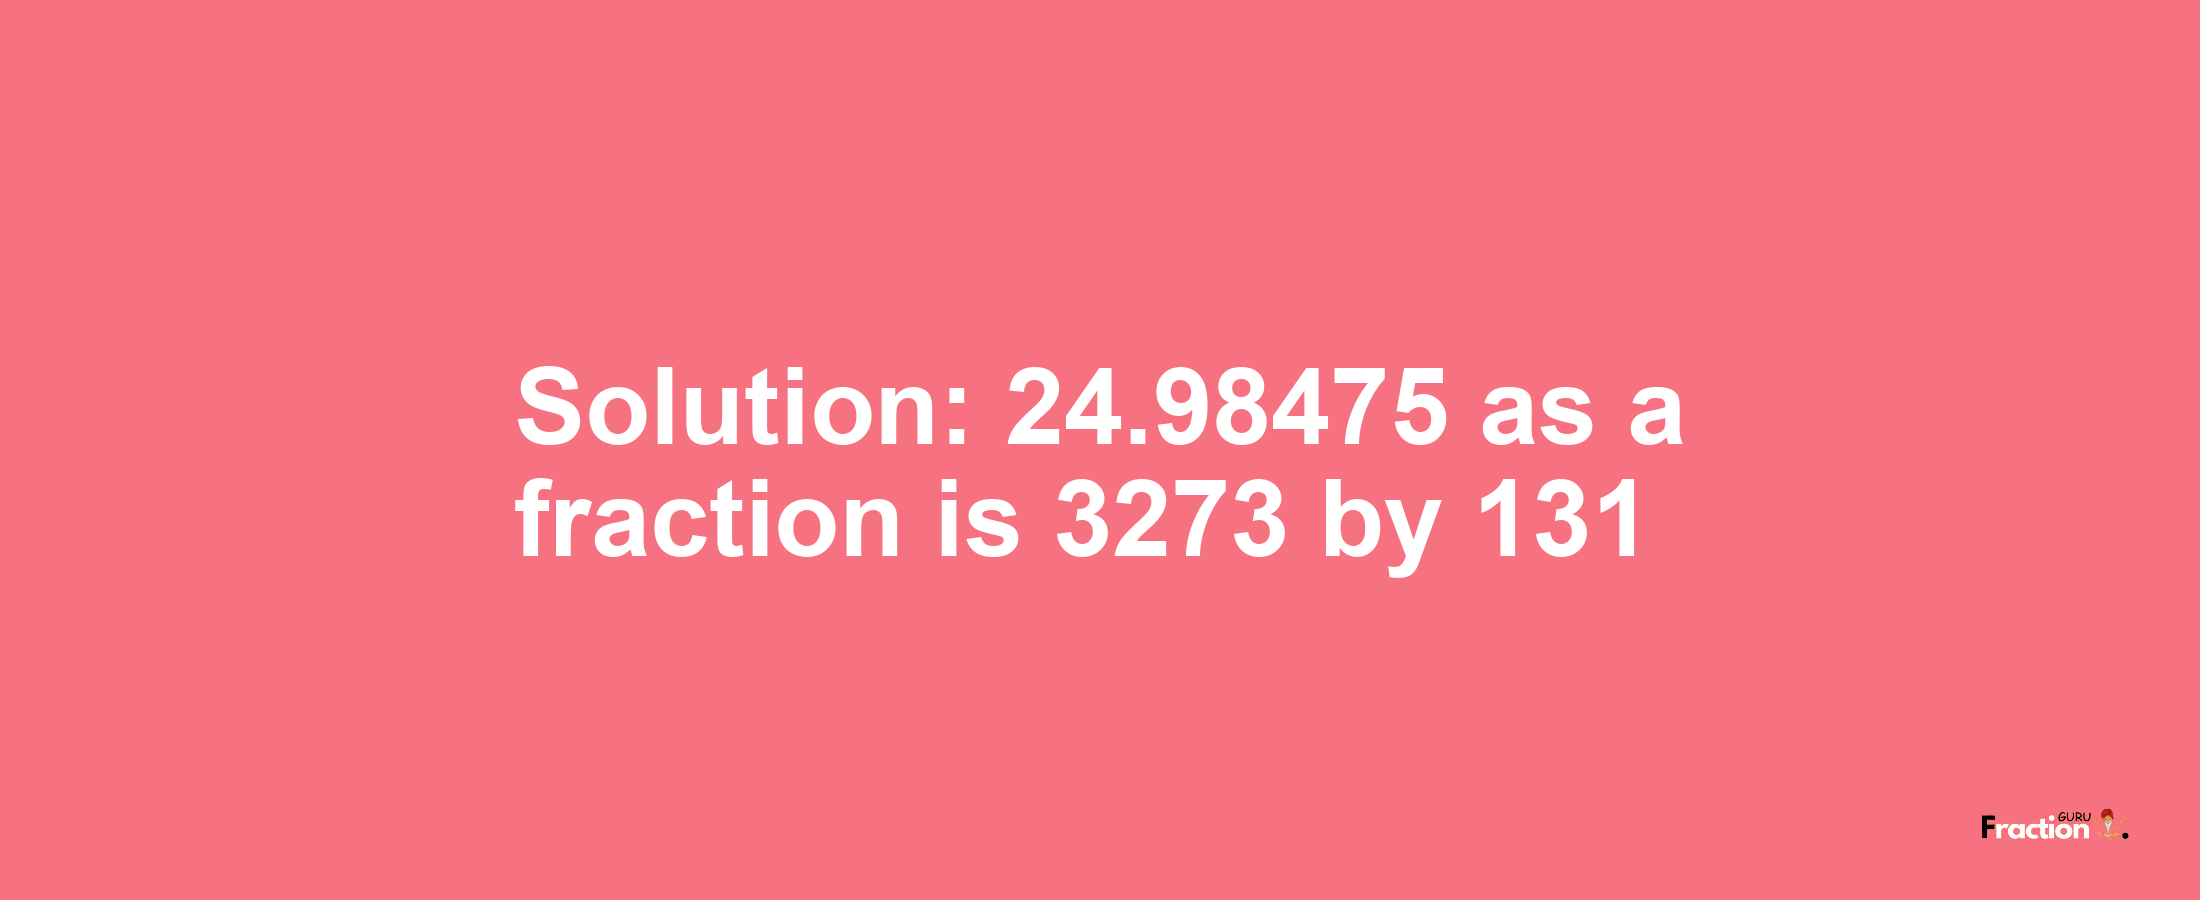 Solution:24.98475 as a fraction is 3273/131